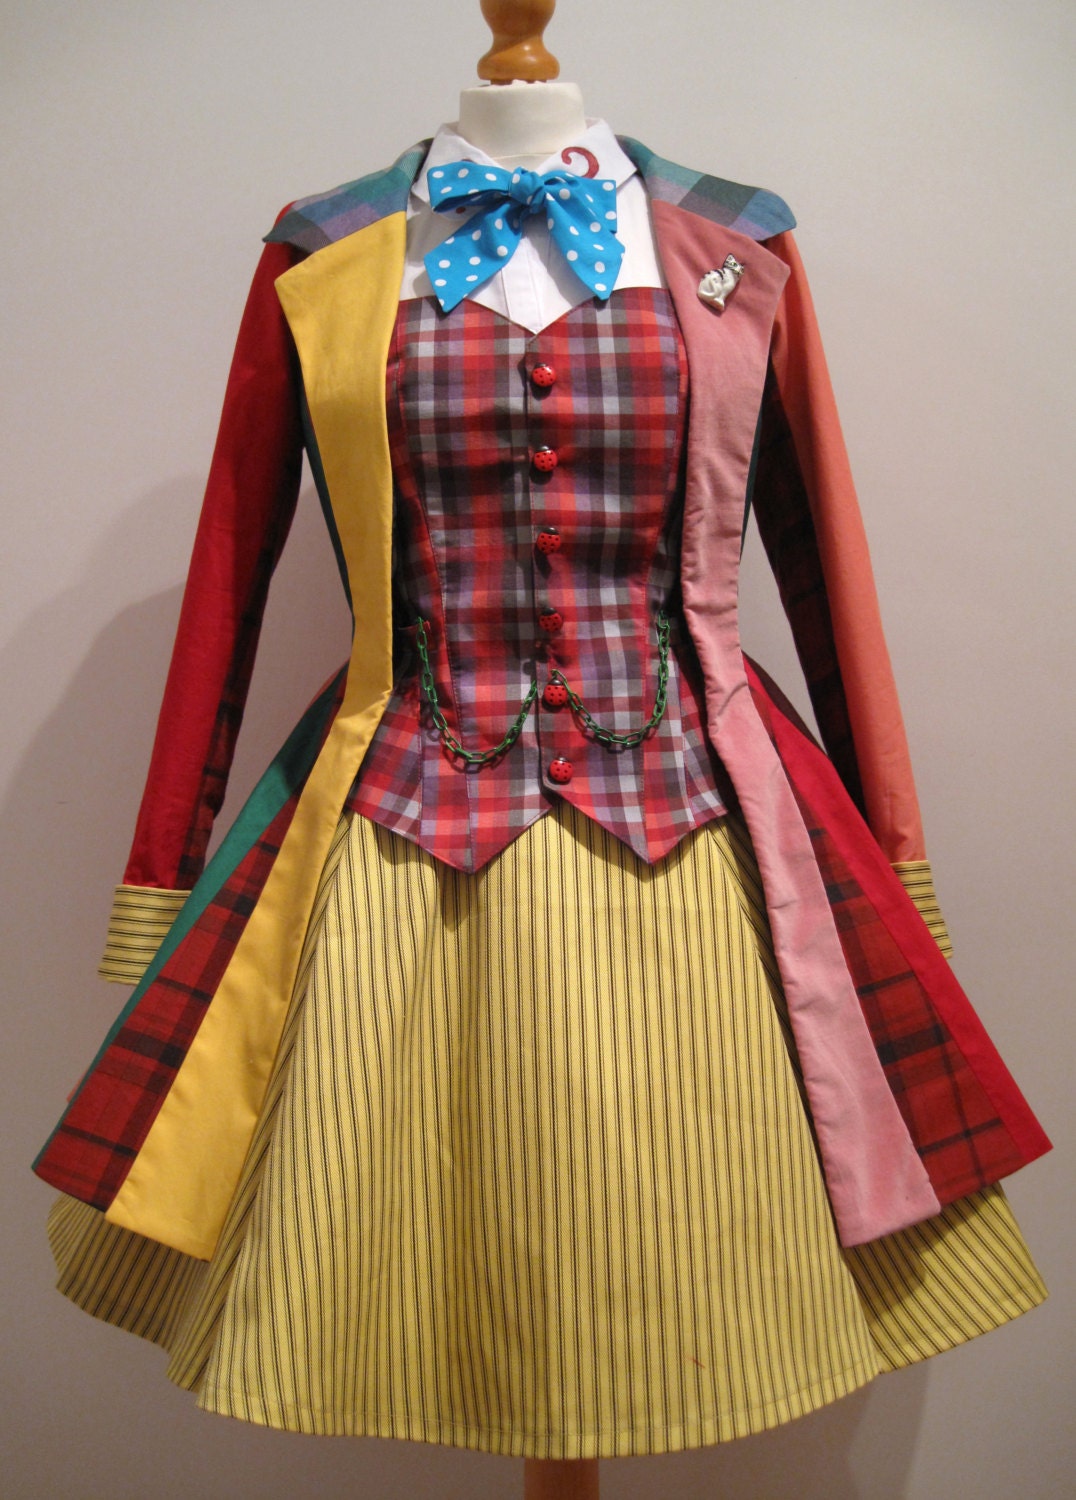 Genderswapped Sixth Doctor cosplay outfit - Boing Boing